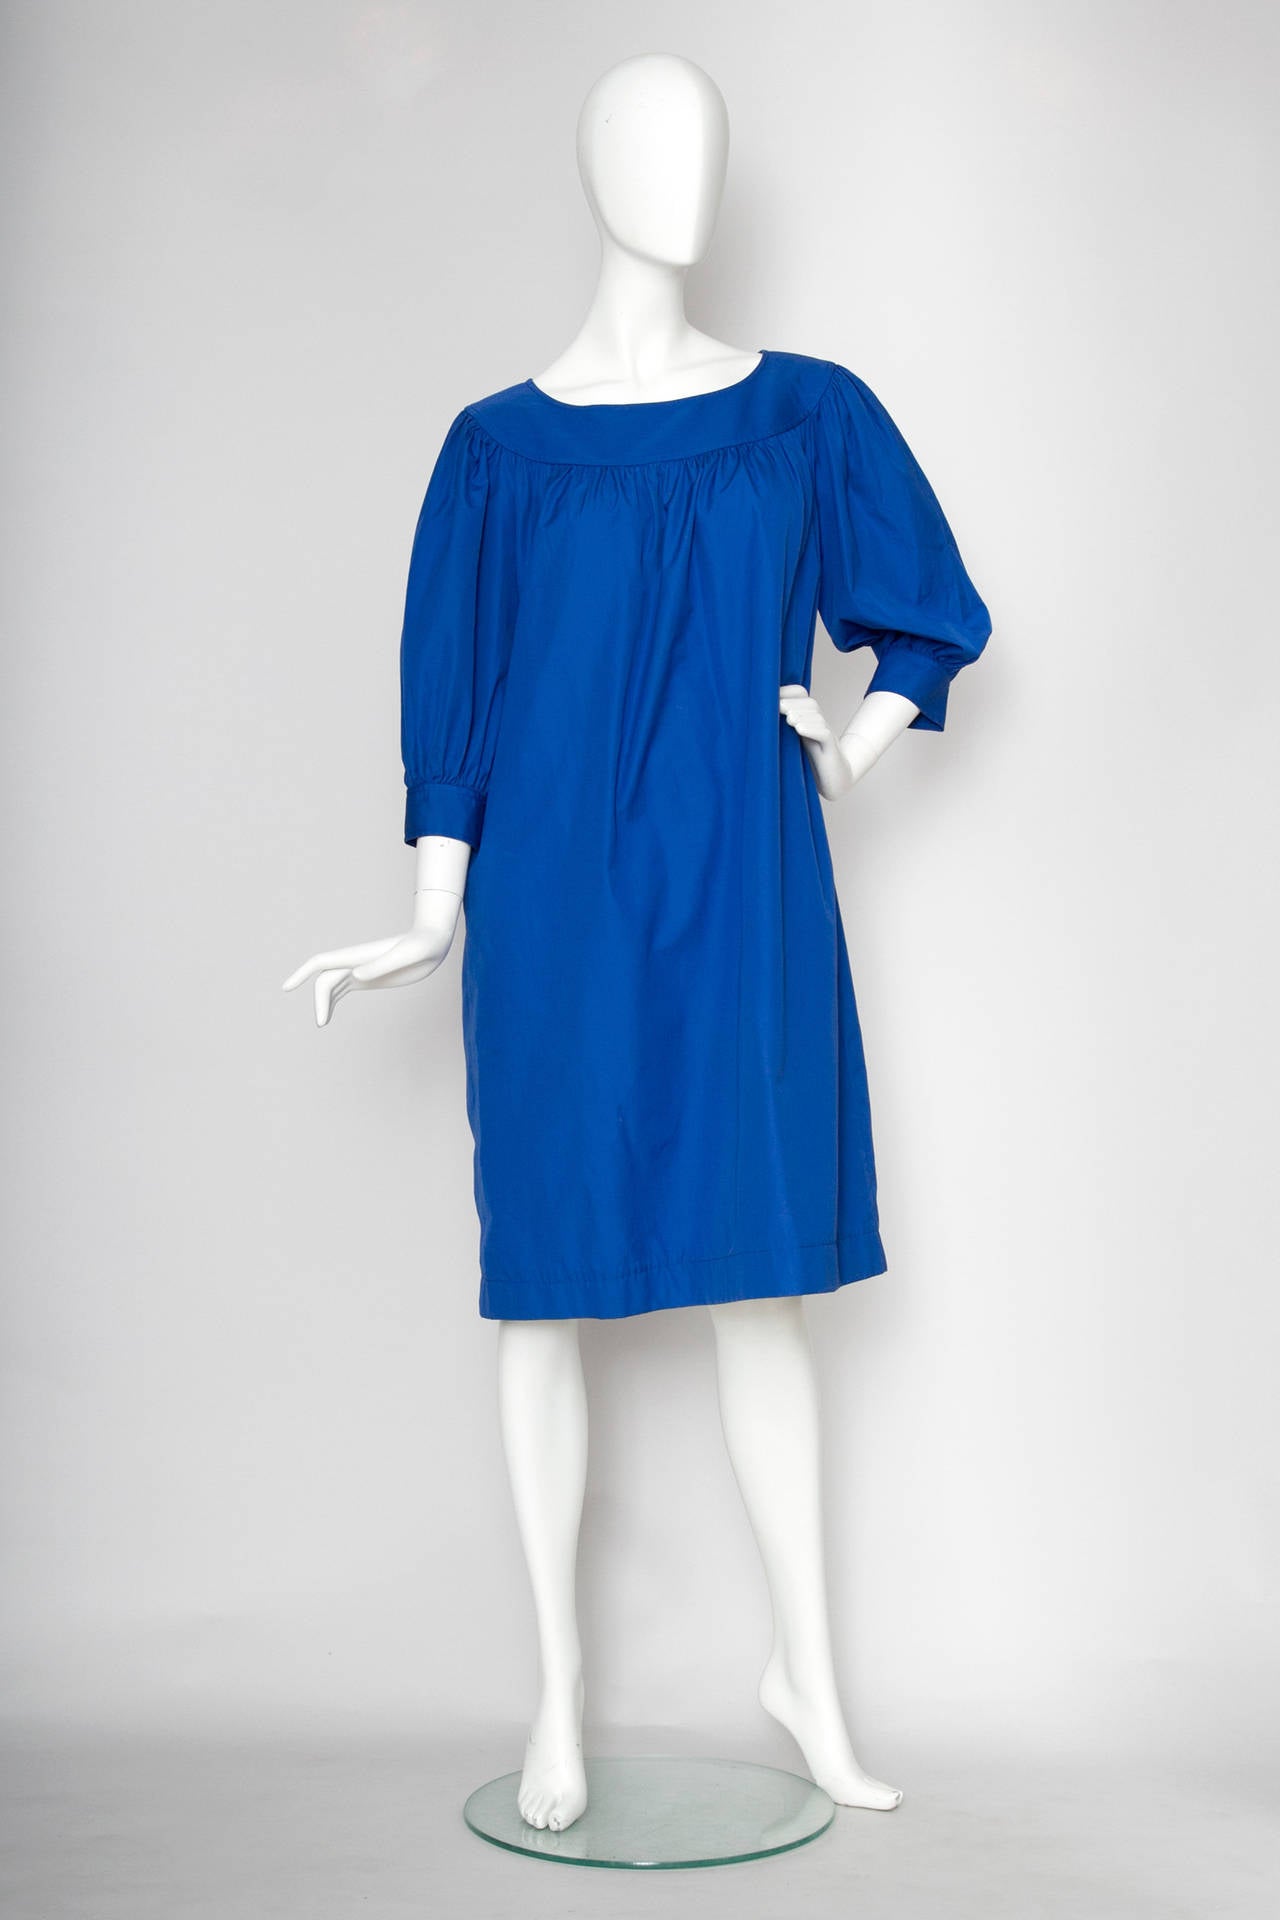 A 1980s Yves Saint Laurent Variation peasant cotton dress in a gorgeous blue colour with three quarter length voluminous sleeves, a scoop neckline and invisible side pockets. 

The dress appears to be in unworn condition with original labels